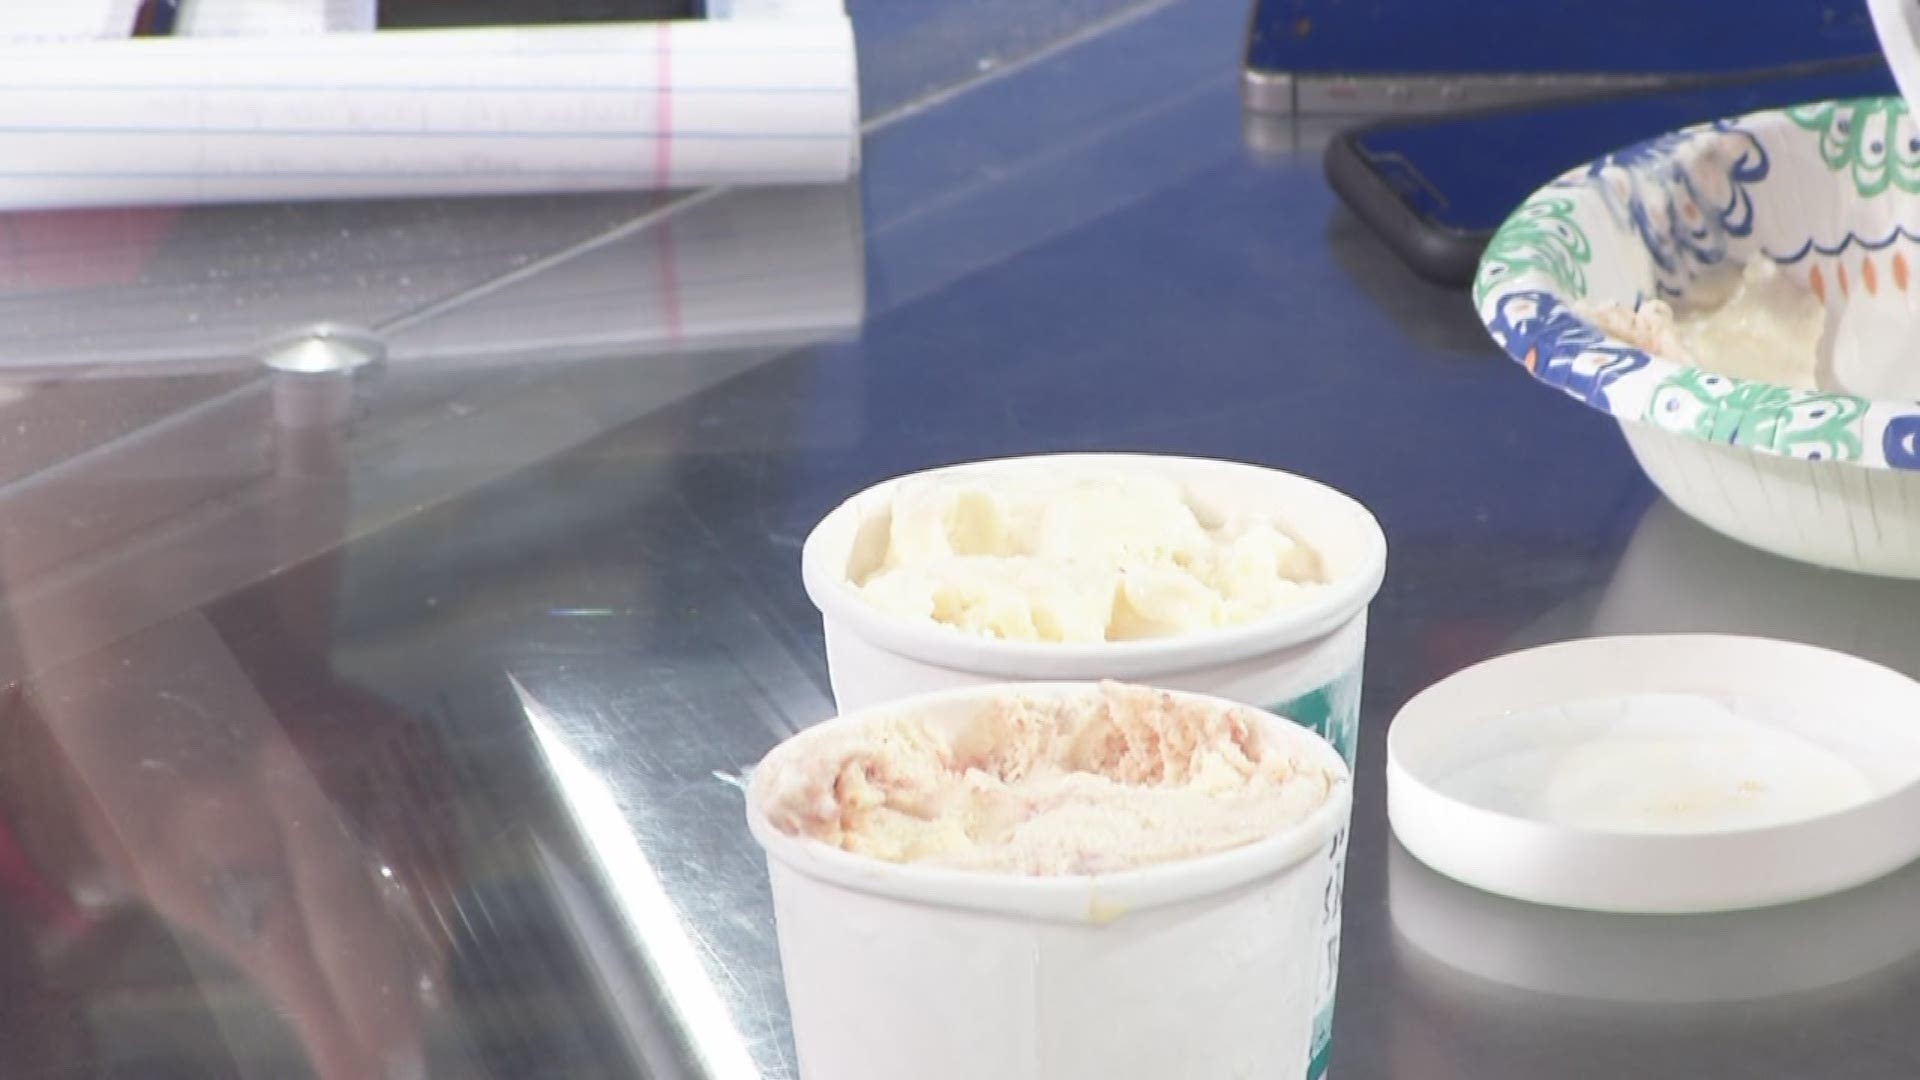 The 9NEWS morning team tries out four unusual flavors from Sweet Action Ice Cream